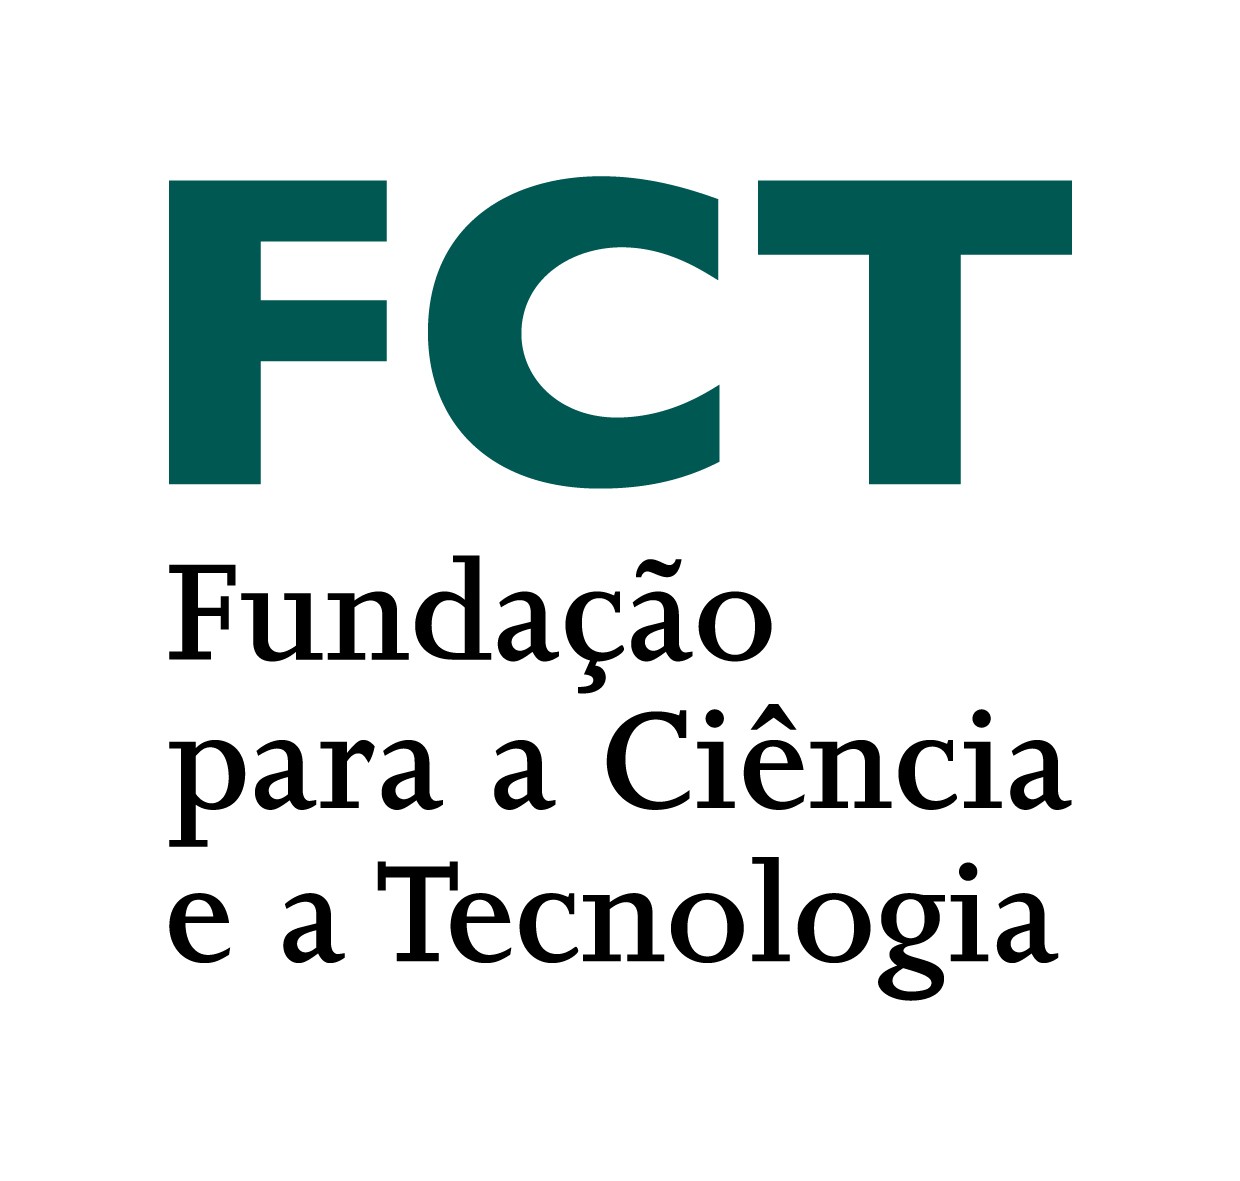 New deadlines for FCT Contests | Faculty of Medicine of the University of Lisbon